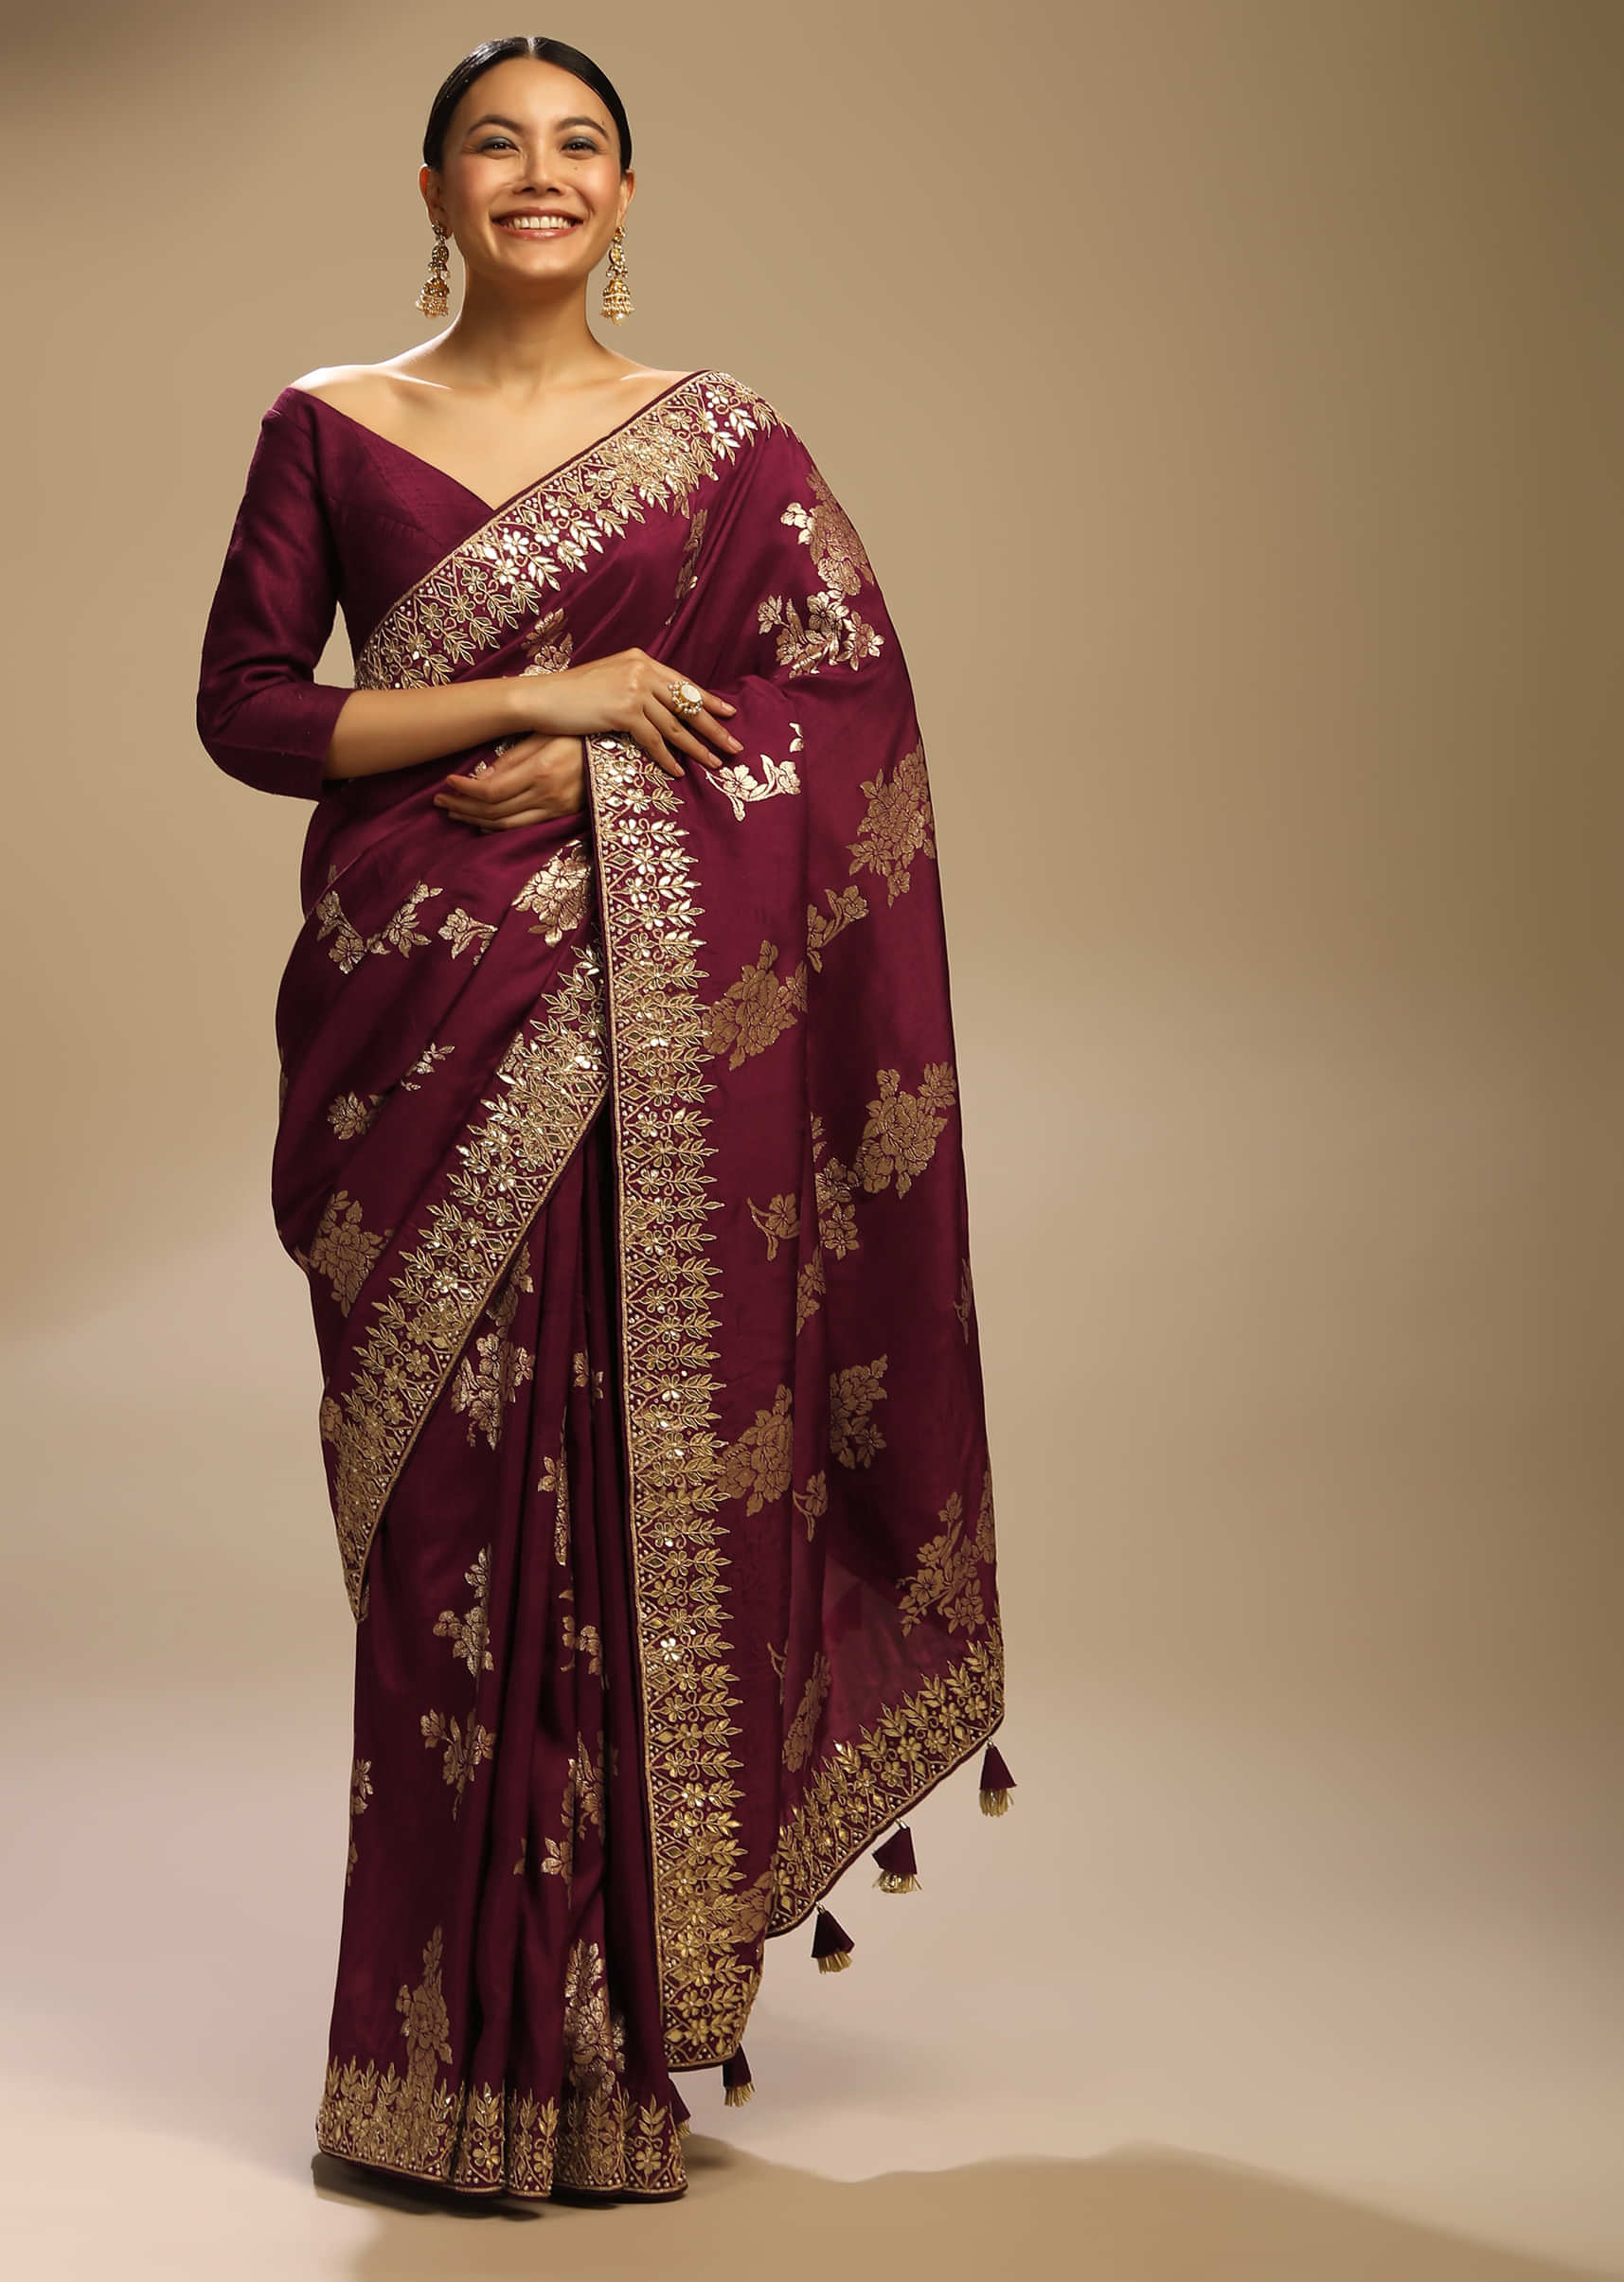 Wine Saree In Dupion Silk With Woven Floral Motifs And Gotta Embroidered Floral Border